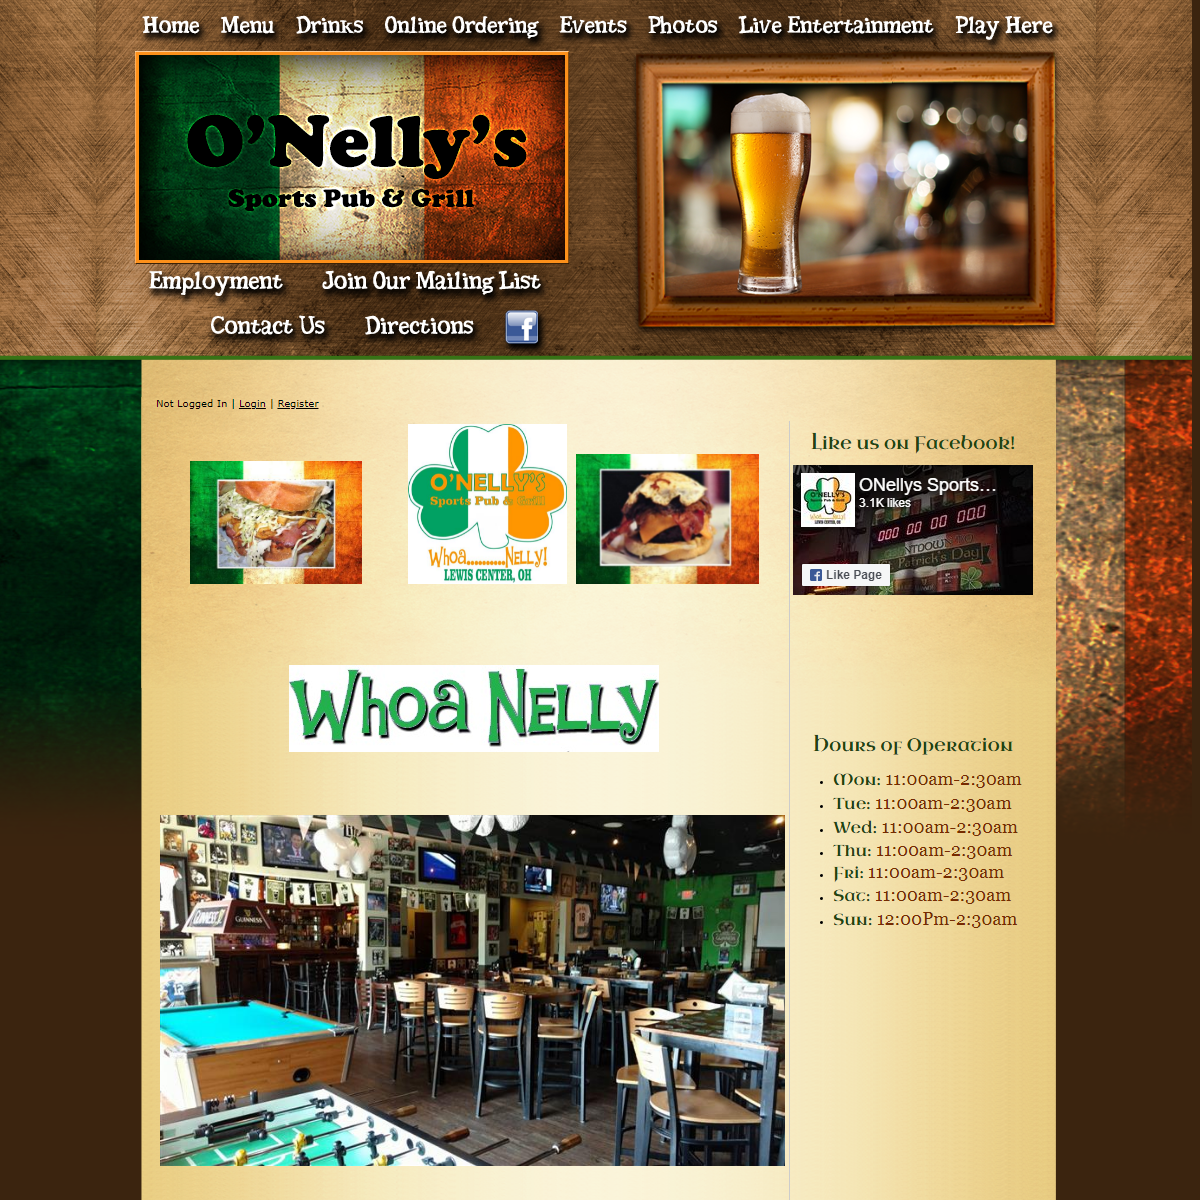 A complete backup of http://www.onellyspub.com/